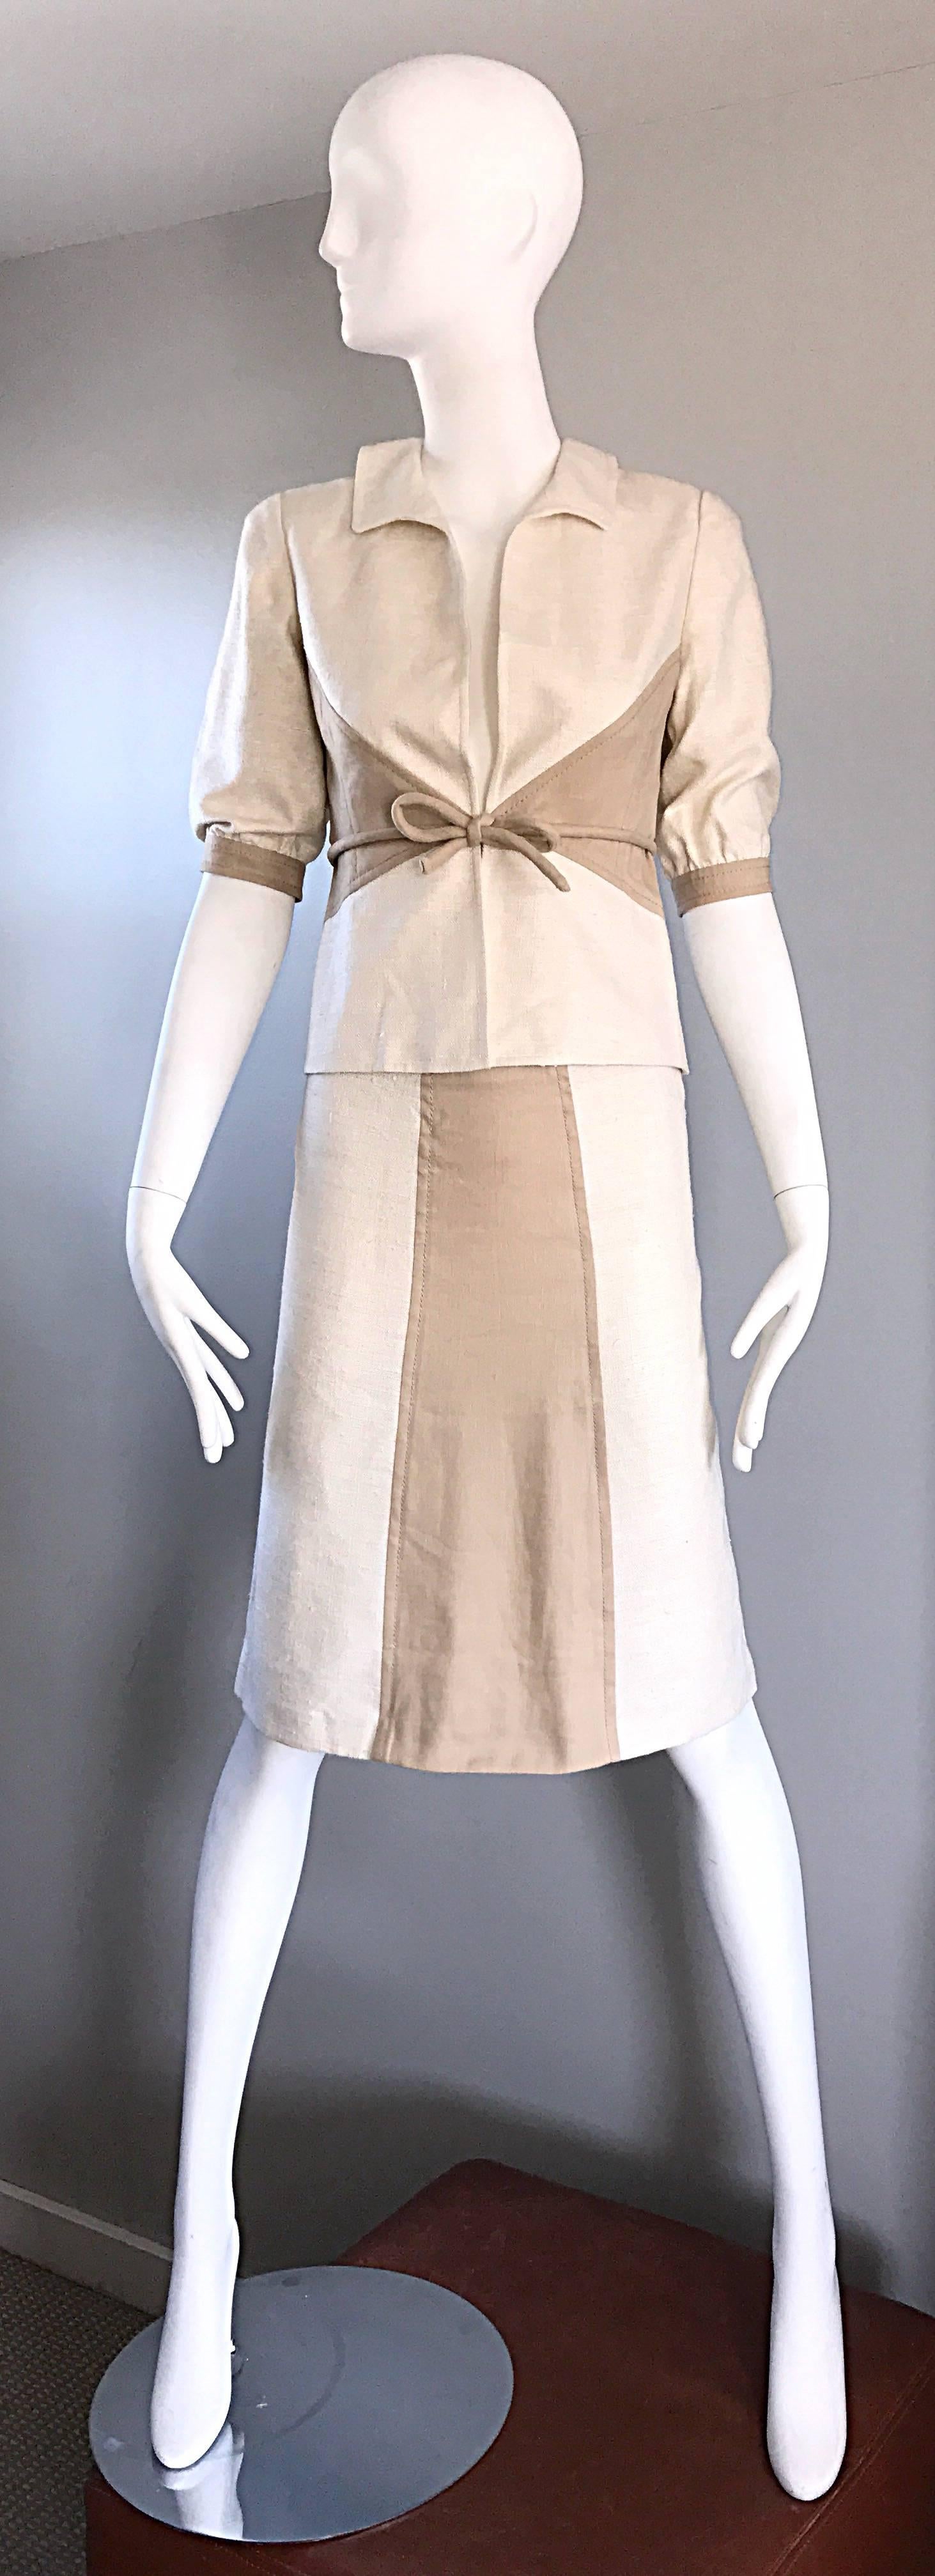 Chic brand new with tags 2004 VALENTINO color block short sleeve ivory and beige/taupe textured silk skirt suit! Retailed for $3,590 at Neiman Marcus! Features color blocking detailon both the short sleeve jacket, and skirt. Luxurious textured silk